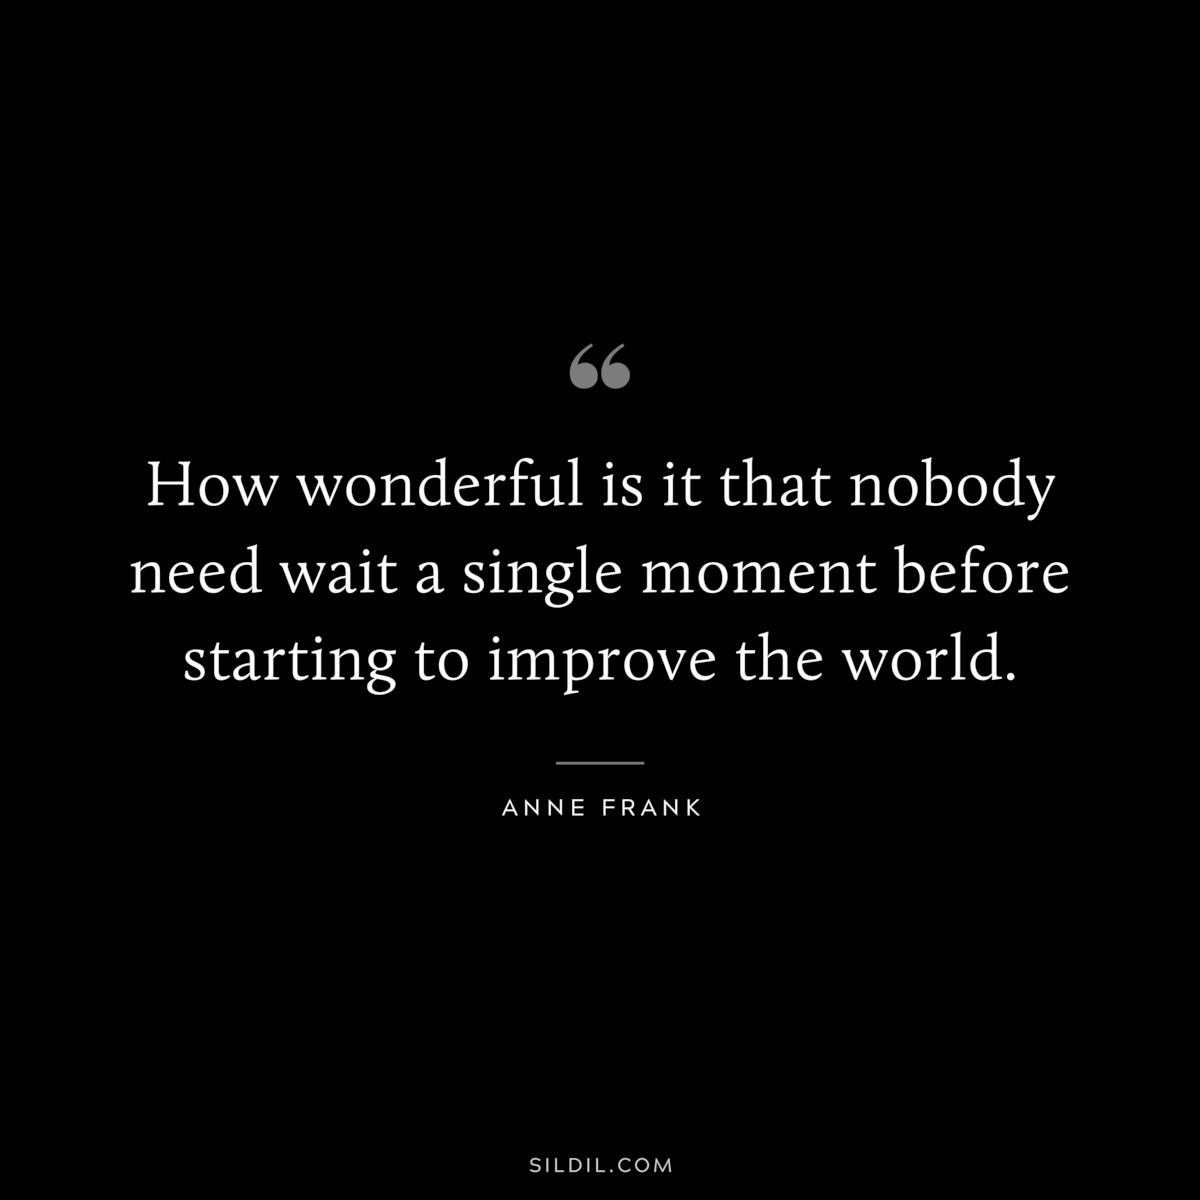 How wonderful is it that nobody need wait a single moment before starting to improve the world. ― Anne Frank